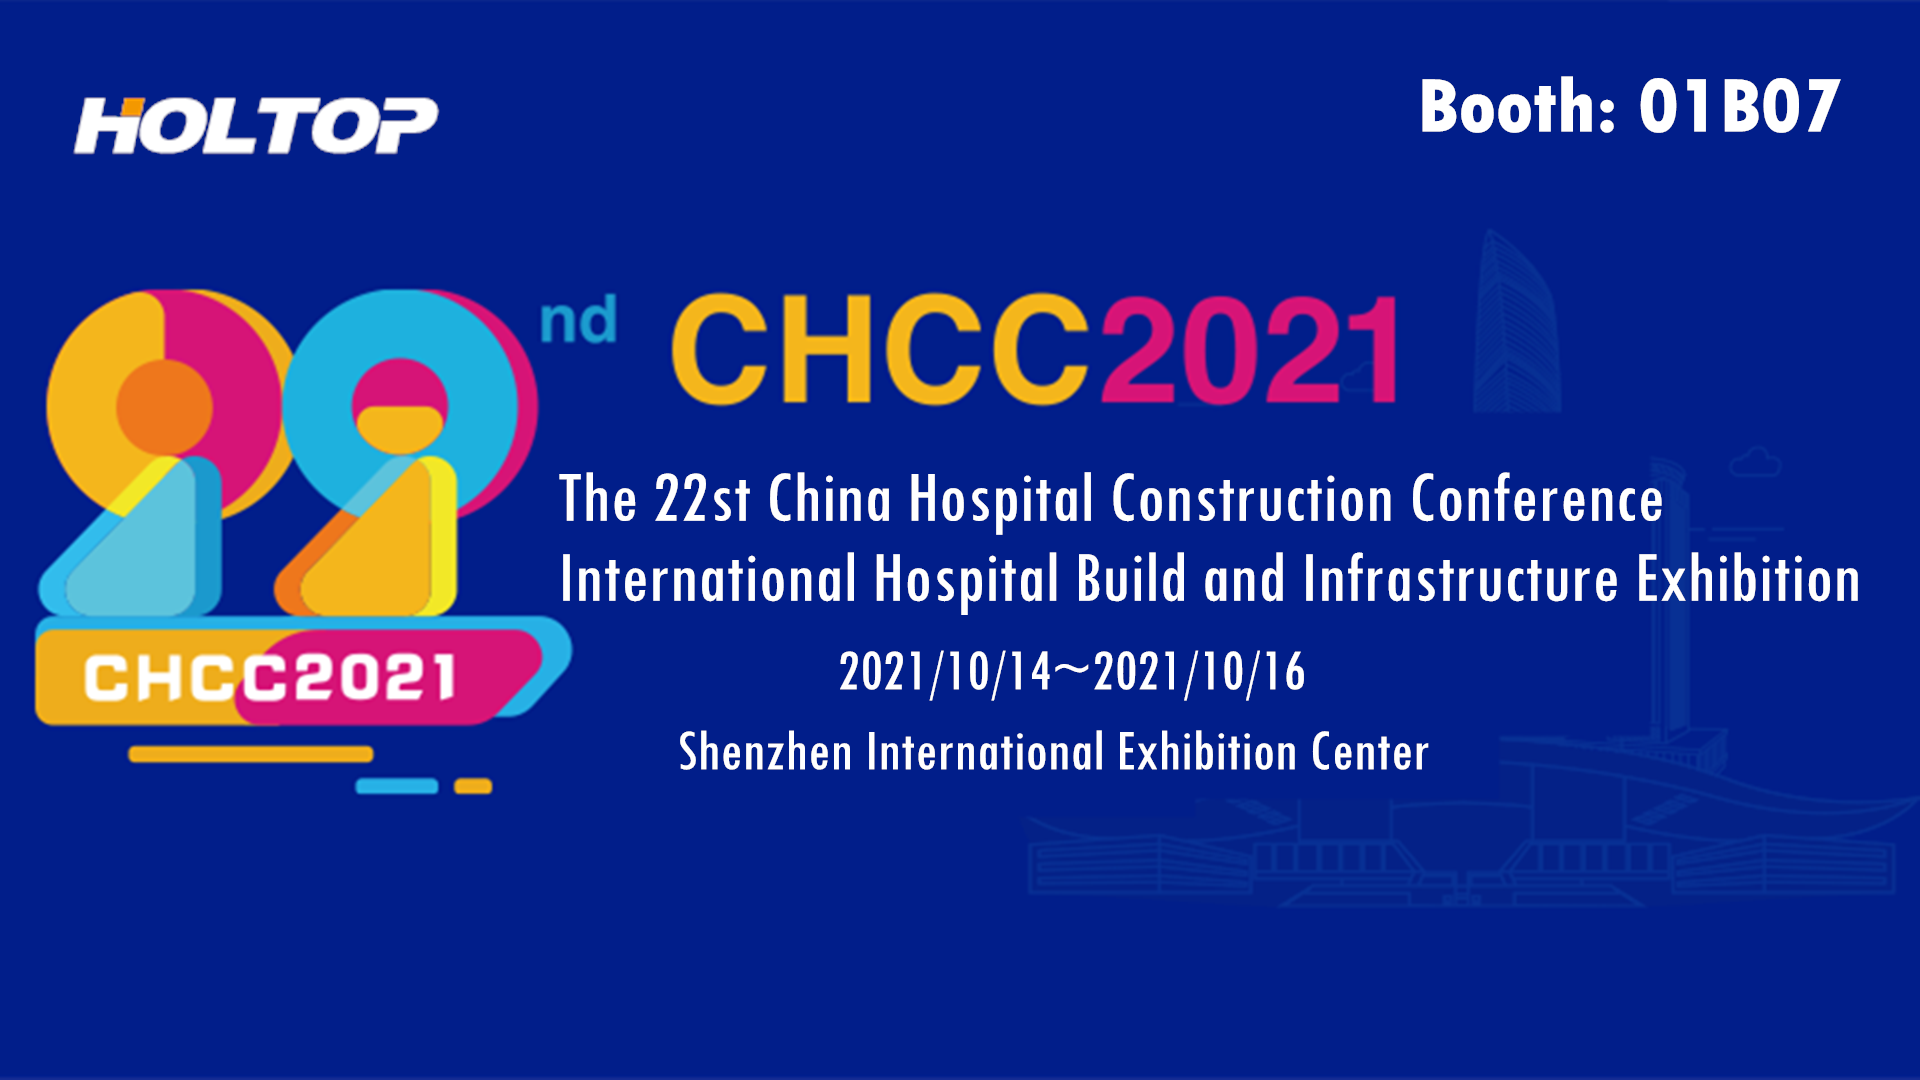 Holtop woont de 22e China Hospital Construction Conference International Hospital Build and Infrastructure Exhibition (CHCC2021) bij